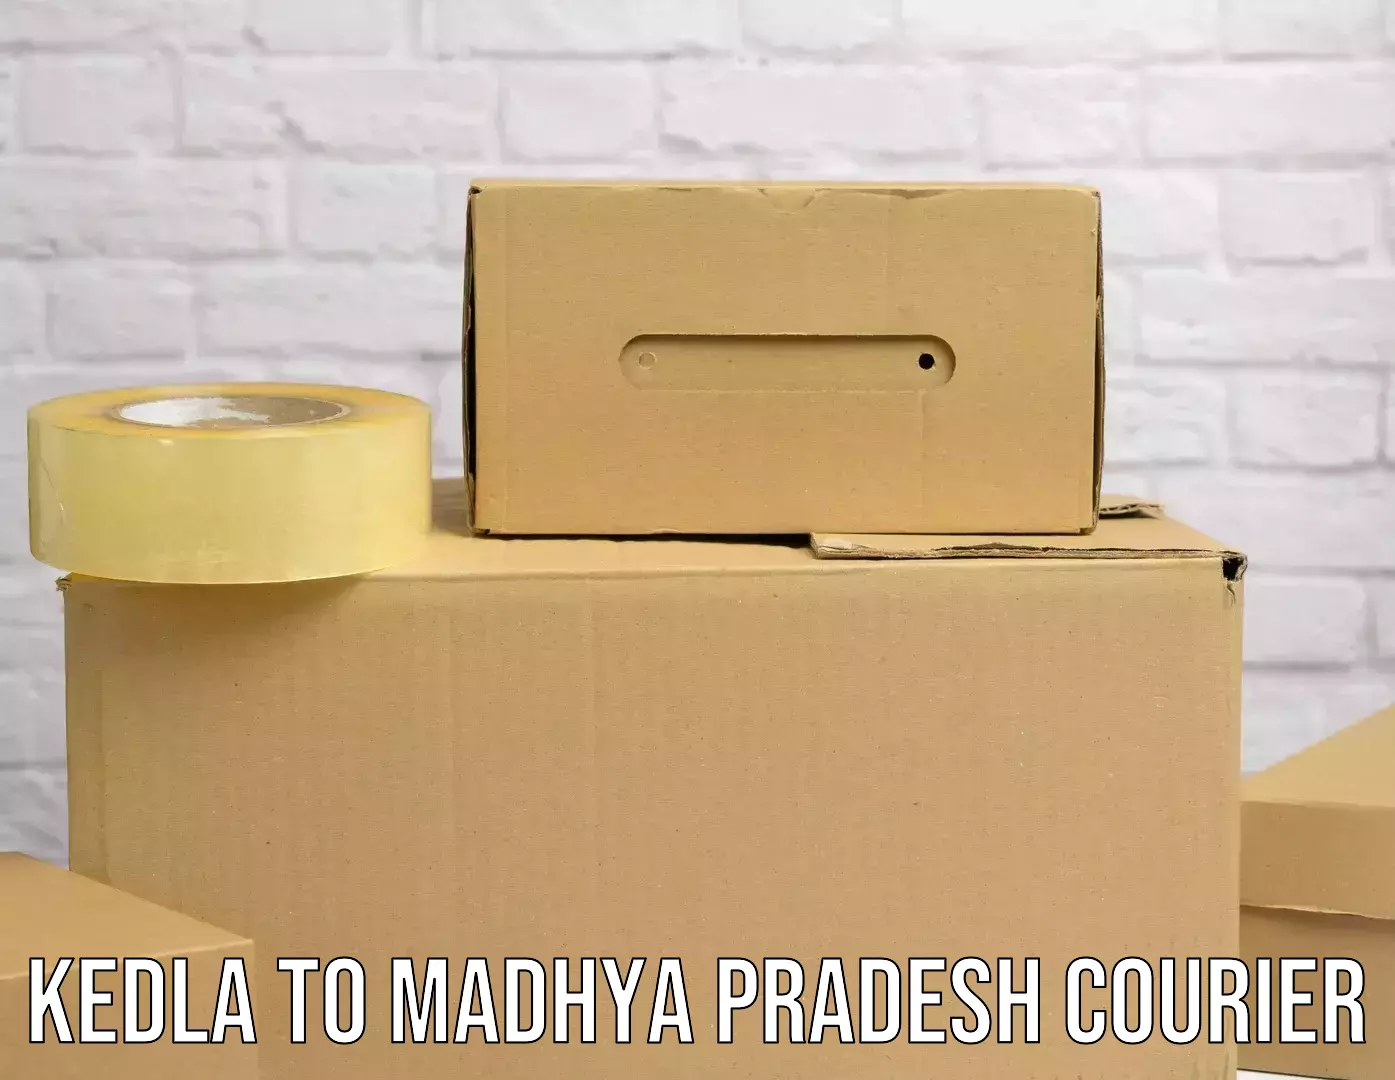 Premium delivery services Kedla to Gwalior